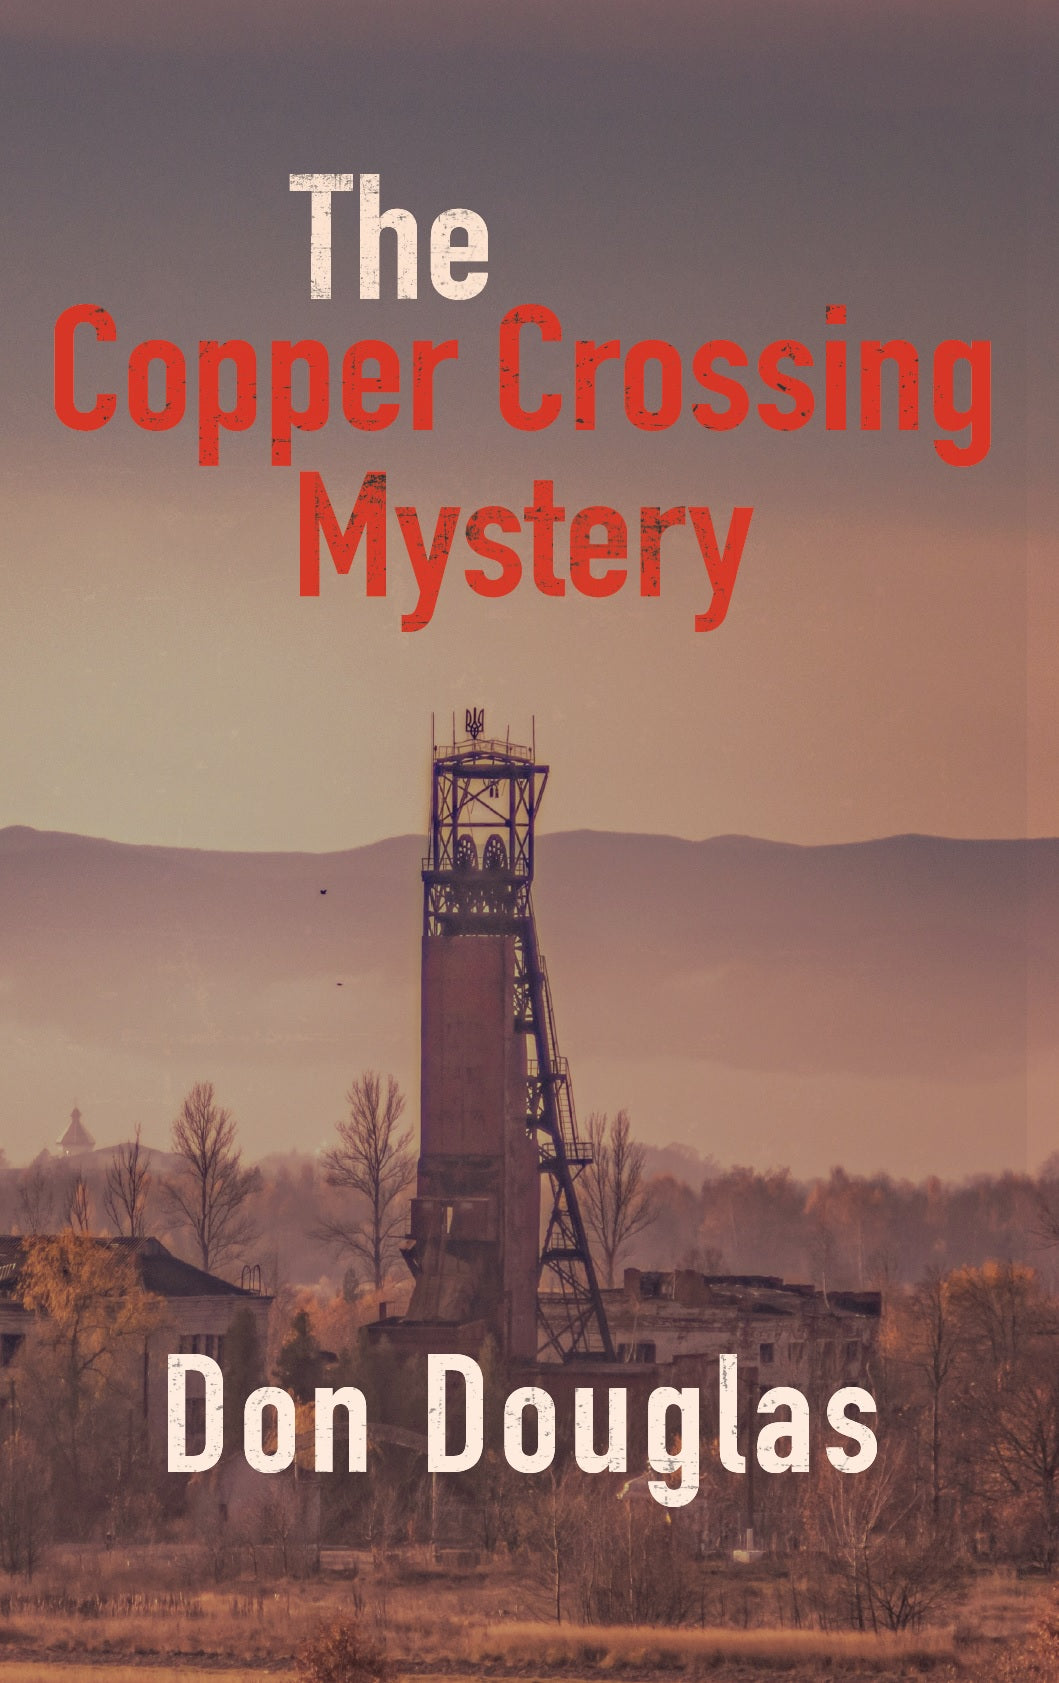 The Copper Crossing Mystery by Don Douglas